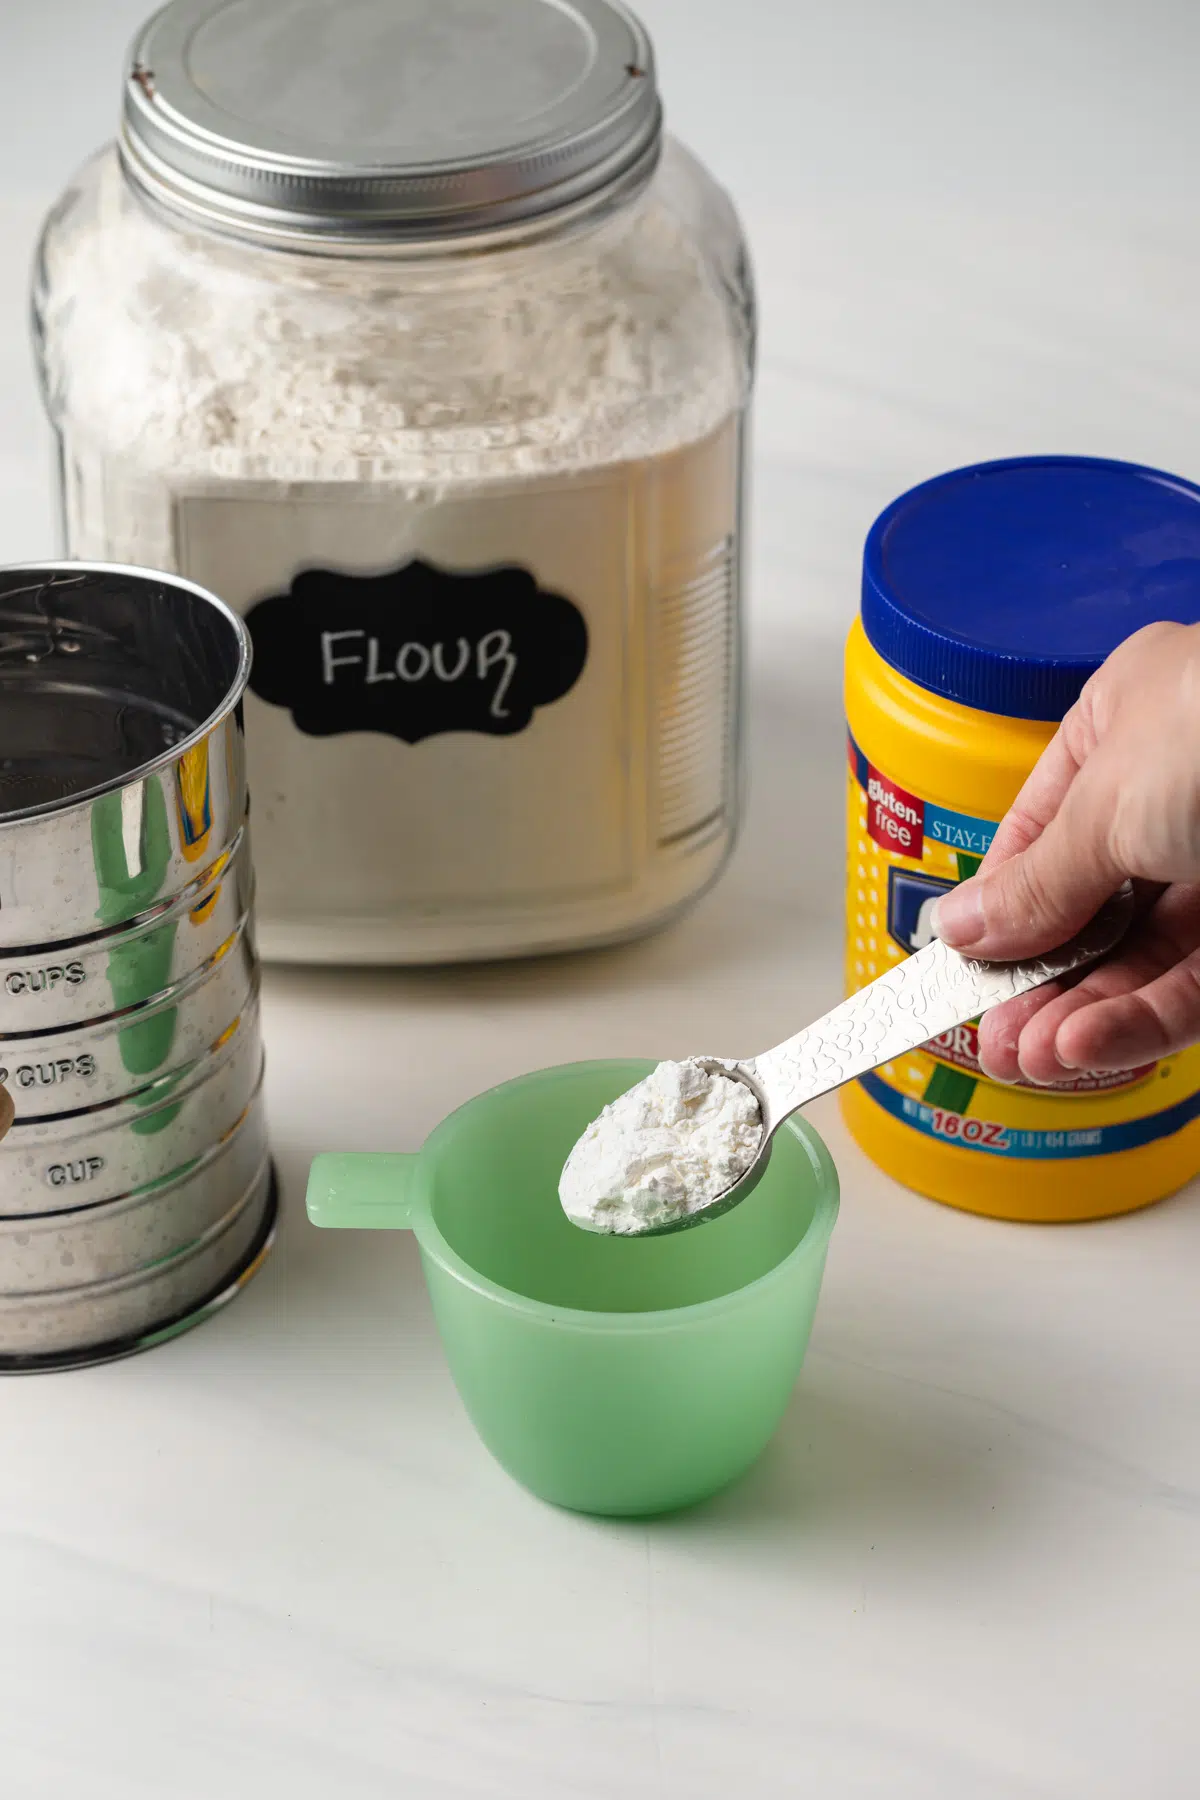 Cornstarch being added to measuring cup.